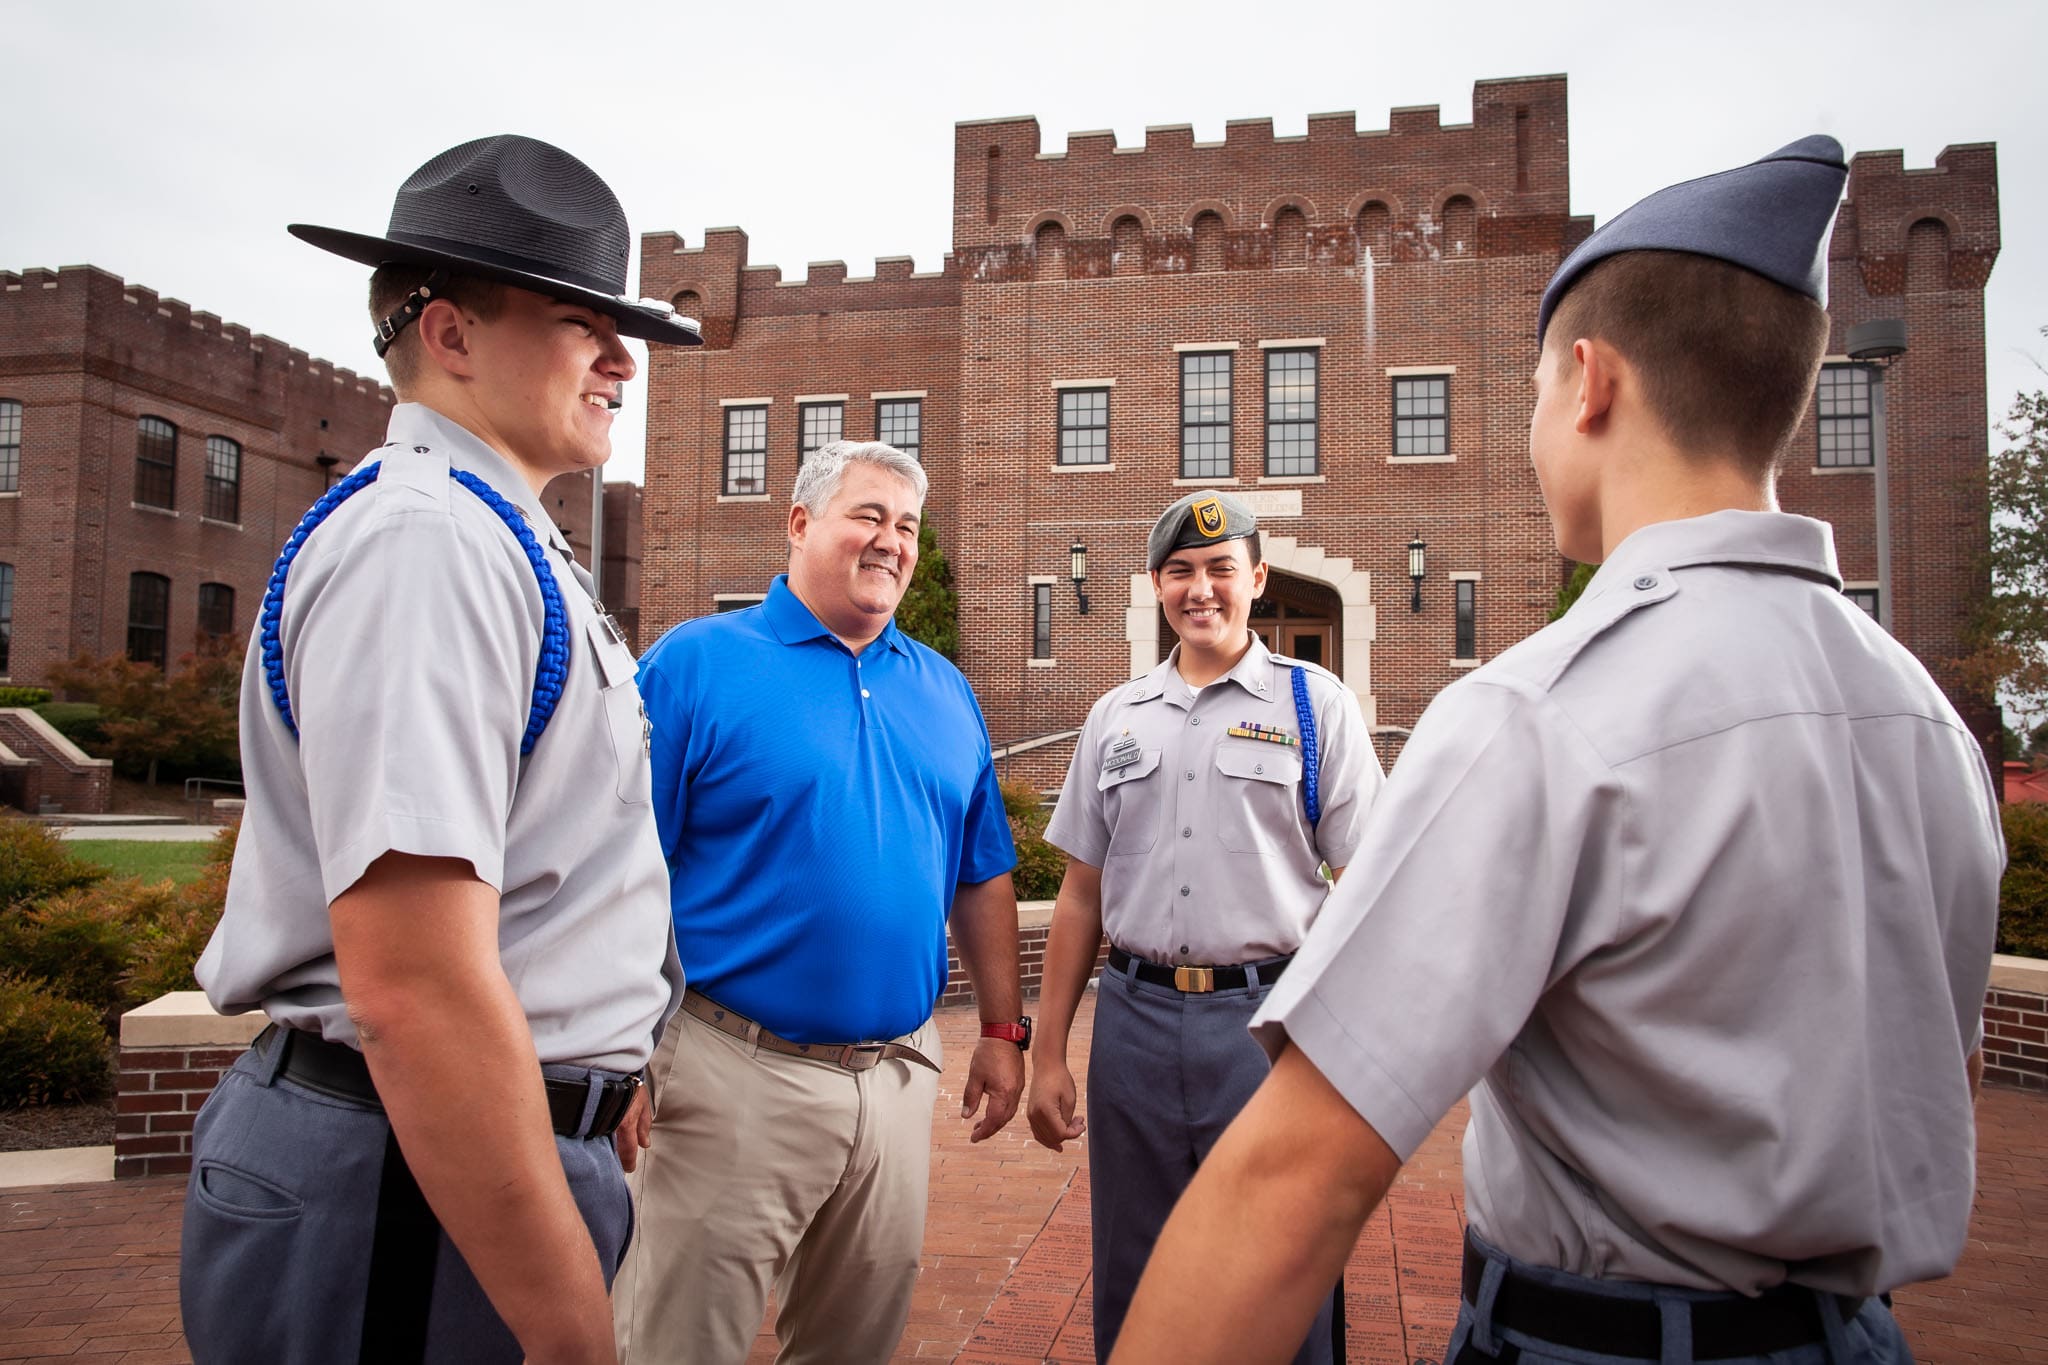 Lauren-McDonald-his-son-and-two-other-Riverside-Military-Academy-cadets-in-a-circle-talking.